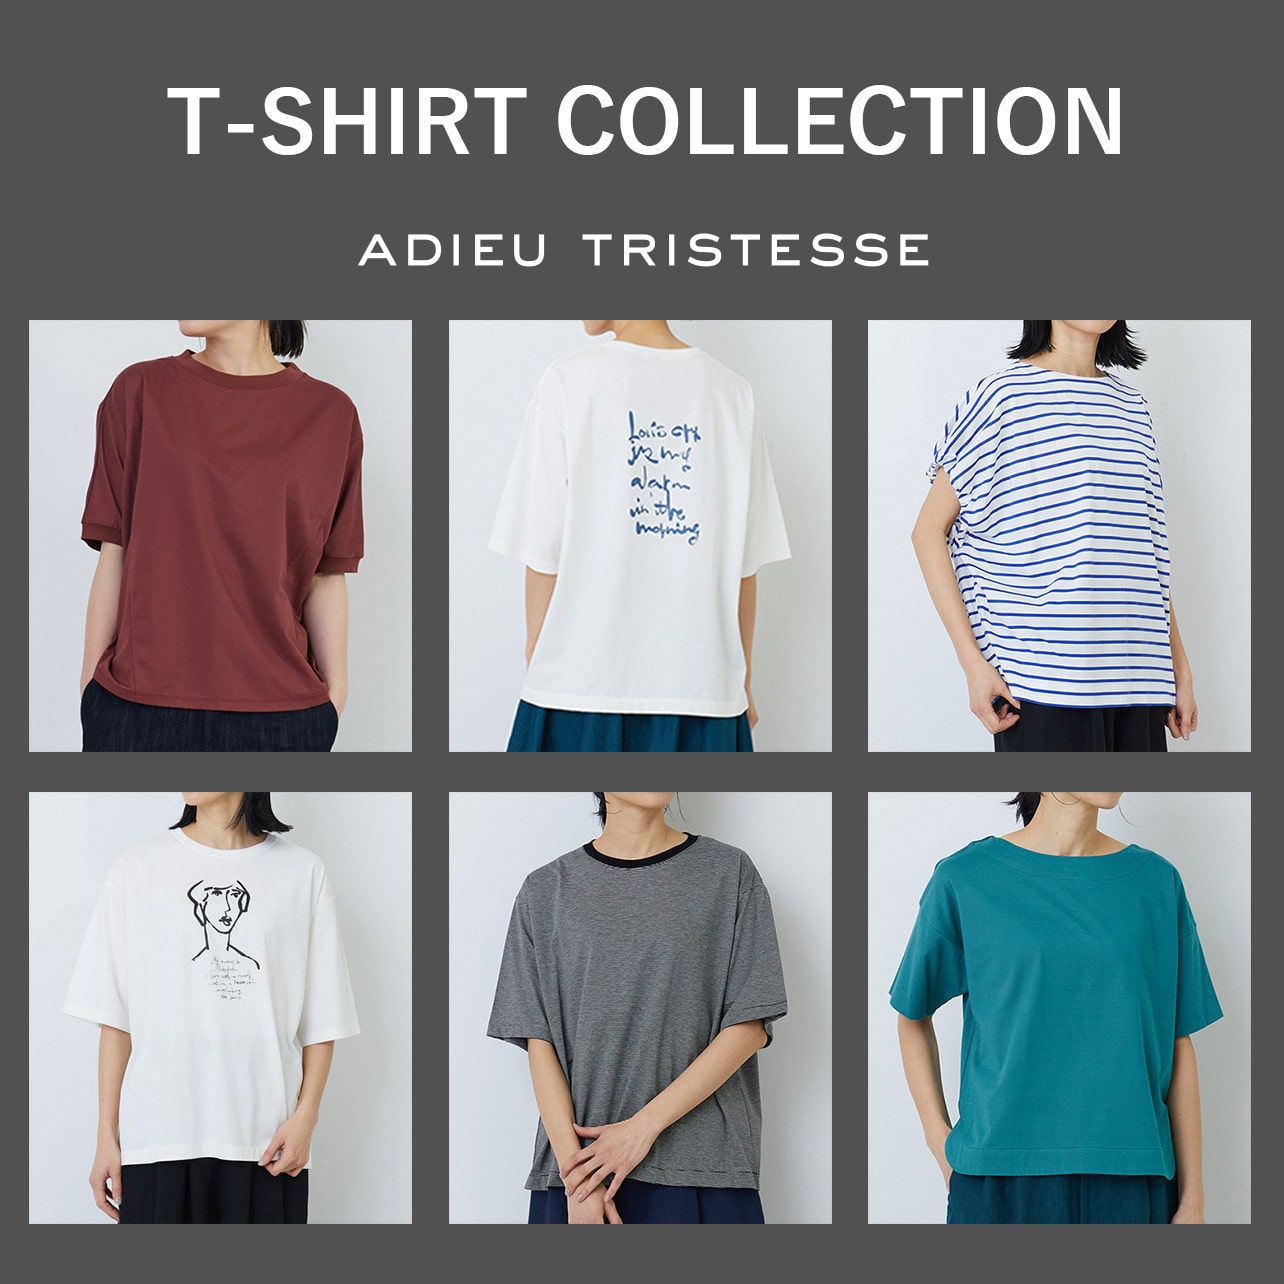 T-SHIRT COLLECTION